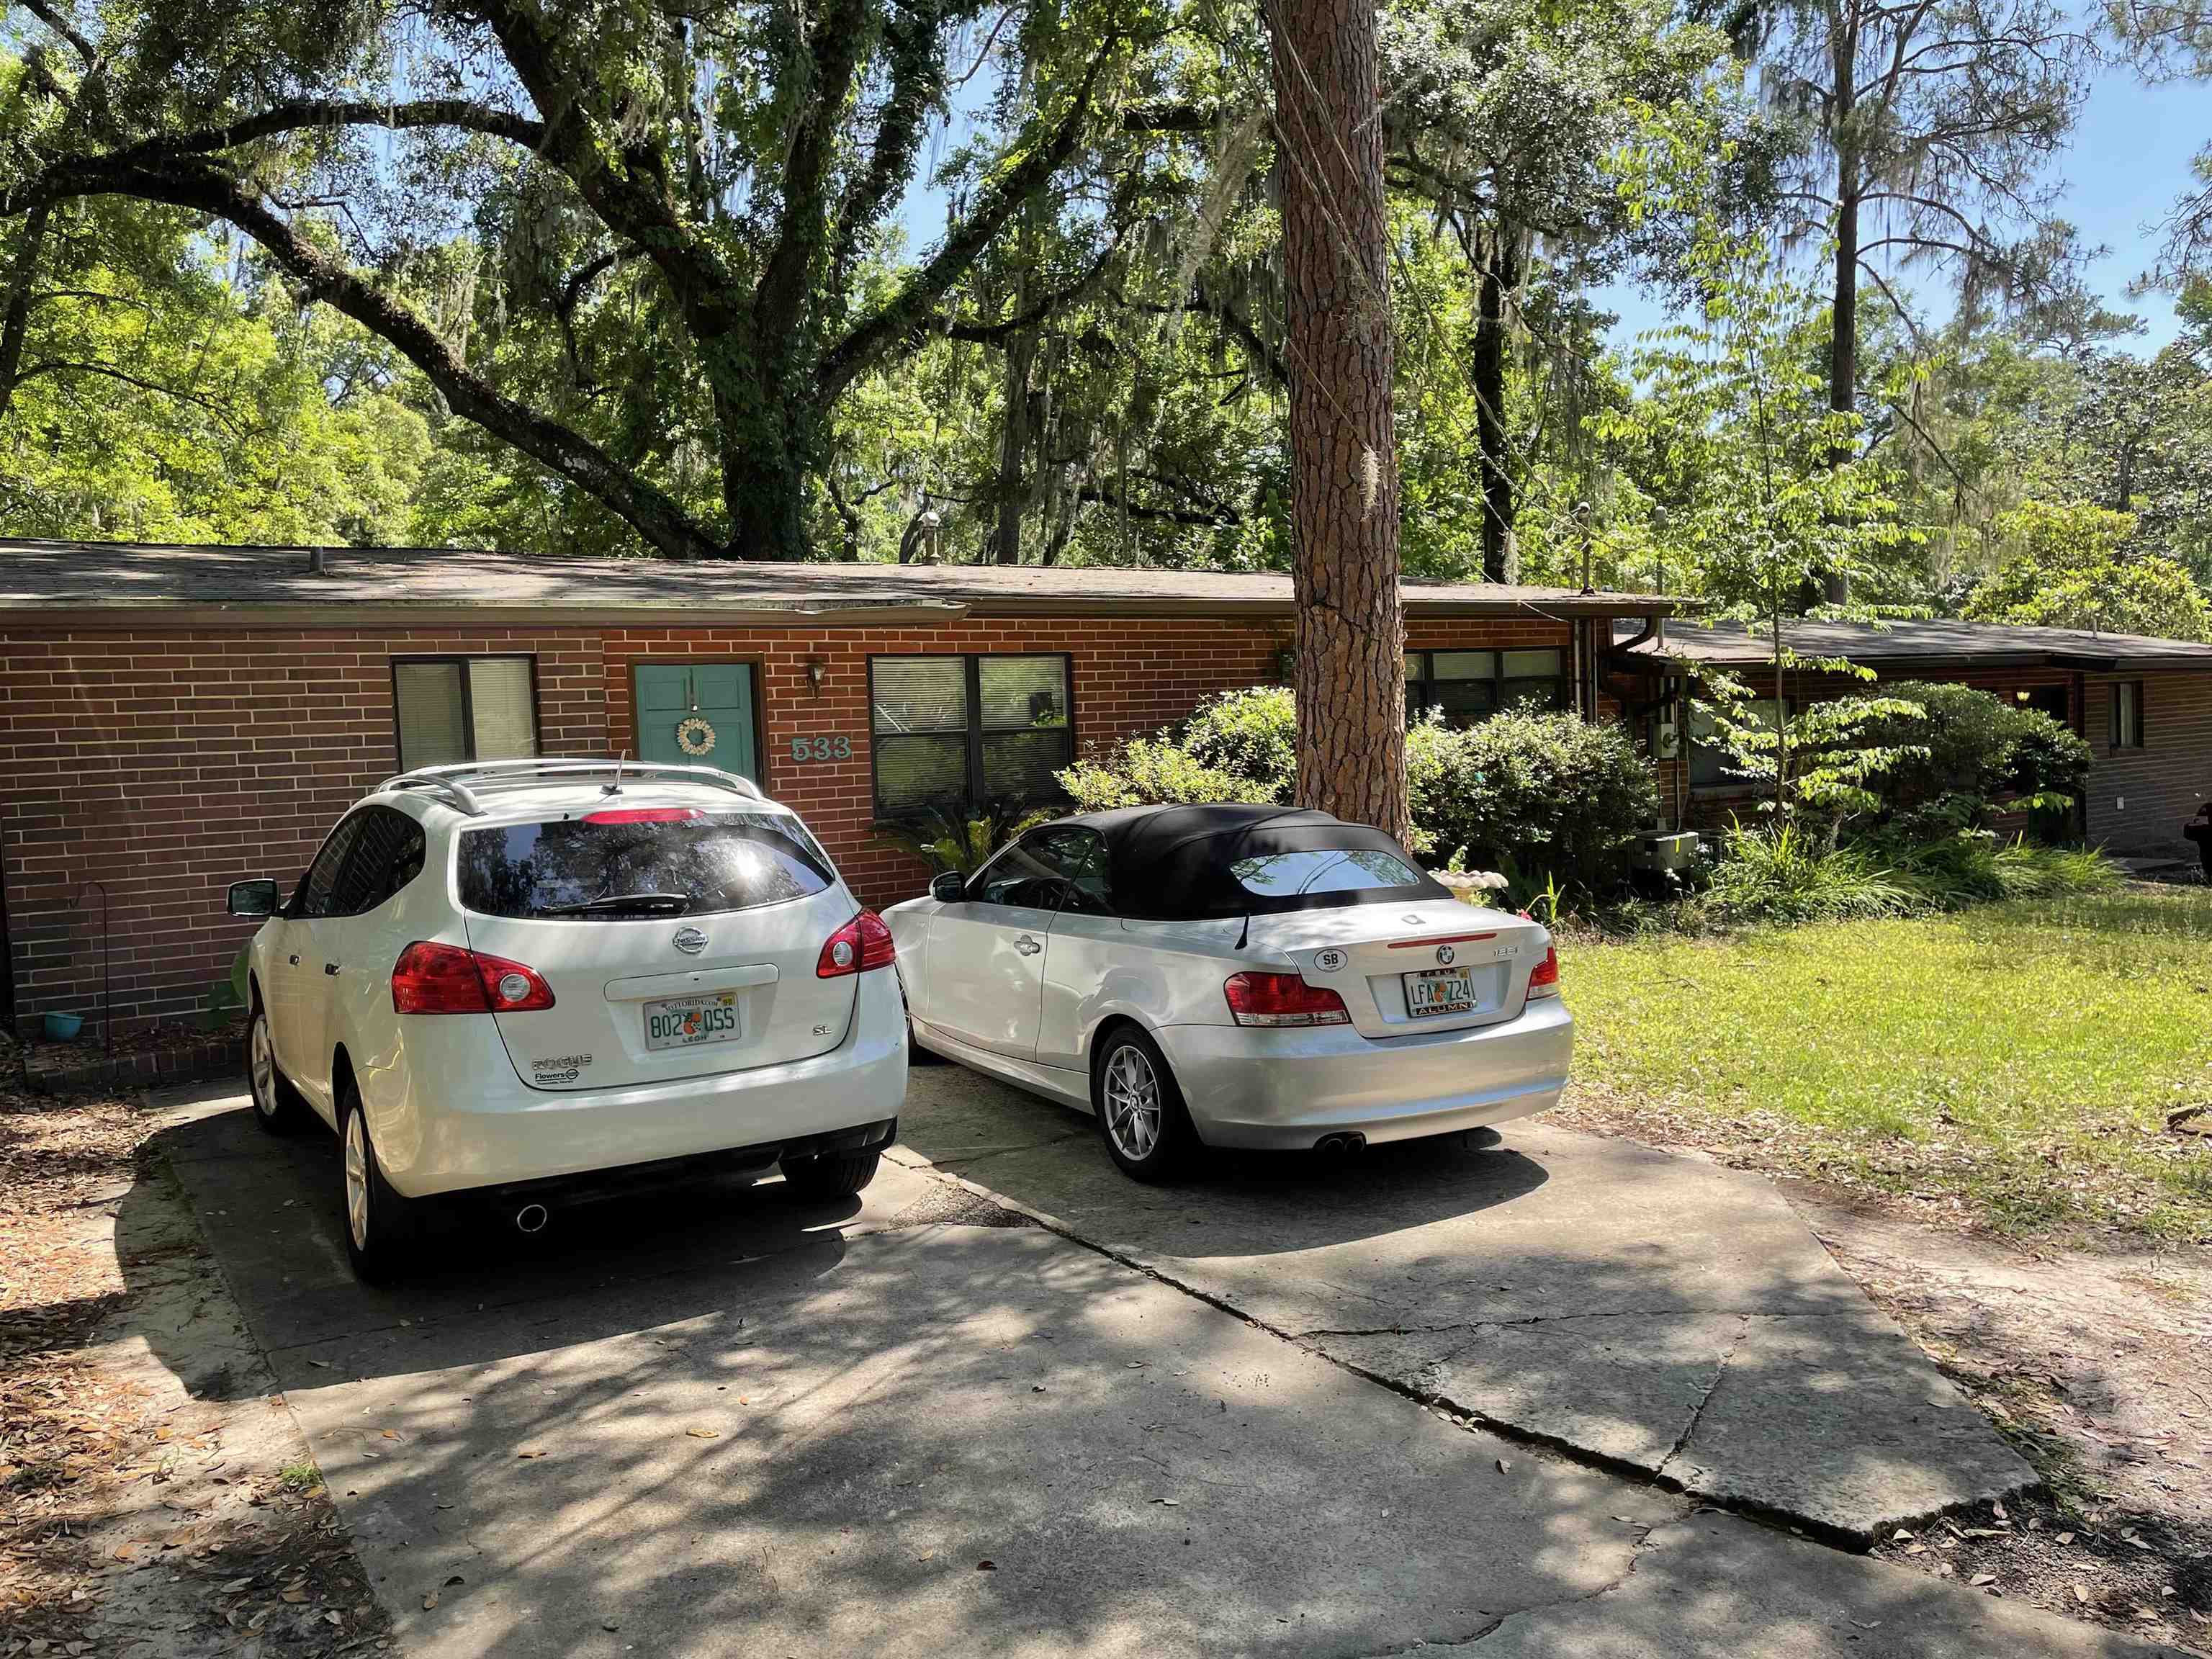 Back on the market with a PRICE IMPROVEMENT, adding even more value! Bring your investors! $40k Potential Gross Rent Income! This is the rarest one of all! All brick duplex with a separate tiny home in the back, in PRIME Myers Park! Walk to Cascades Park and downtown within minutes. Close to FSU, FAMU, Greenwise, Gaines street shops, and more..... Each unit of the duplex is 3/2, while the adorable tiny home sits in the back, which has just been rented at market rent. Duplex units are under rented, with leases expiring soon. Super well maintained and has been cared for under property management. Adjoining parcel with similar duplex, as well as an apartment underneath rather than a tiny home in the back, is also listed for sale. Roof 2014. Don't miss this opportunity to have a prime investment location in the heart of Tallahassee. Bring your offers! Pictures other than tiny home are older and limited. Newer ones will be coming soon. All measurements are approximate and should be independently reviewed and verified for accuracy.